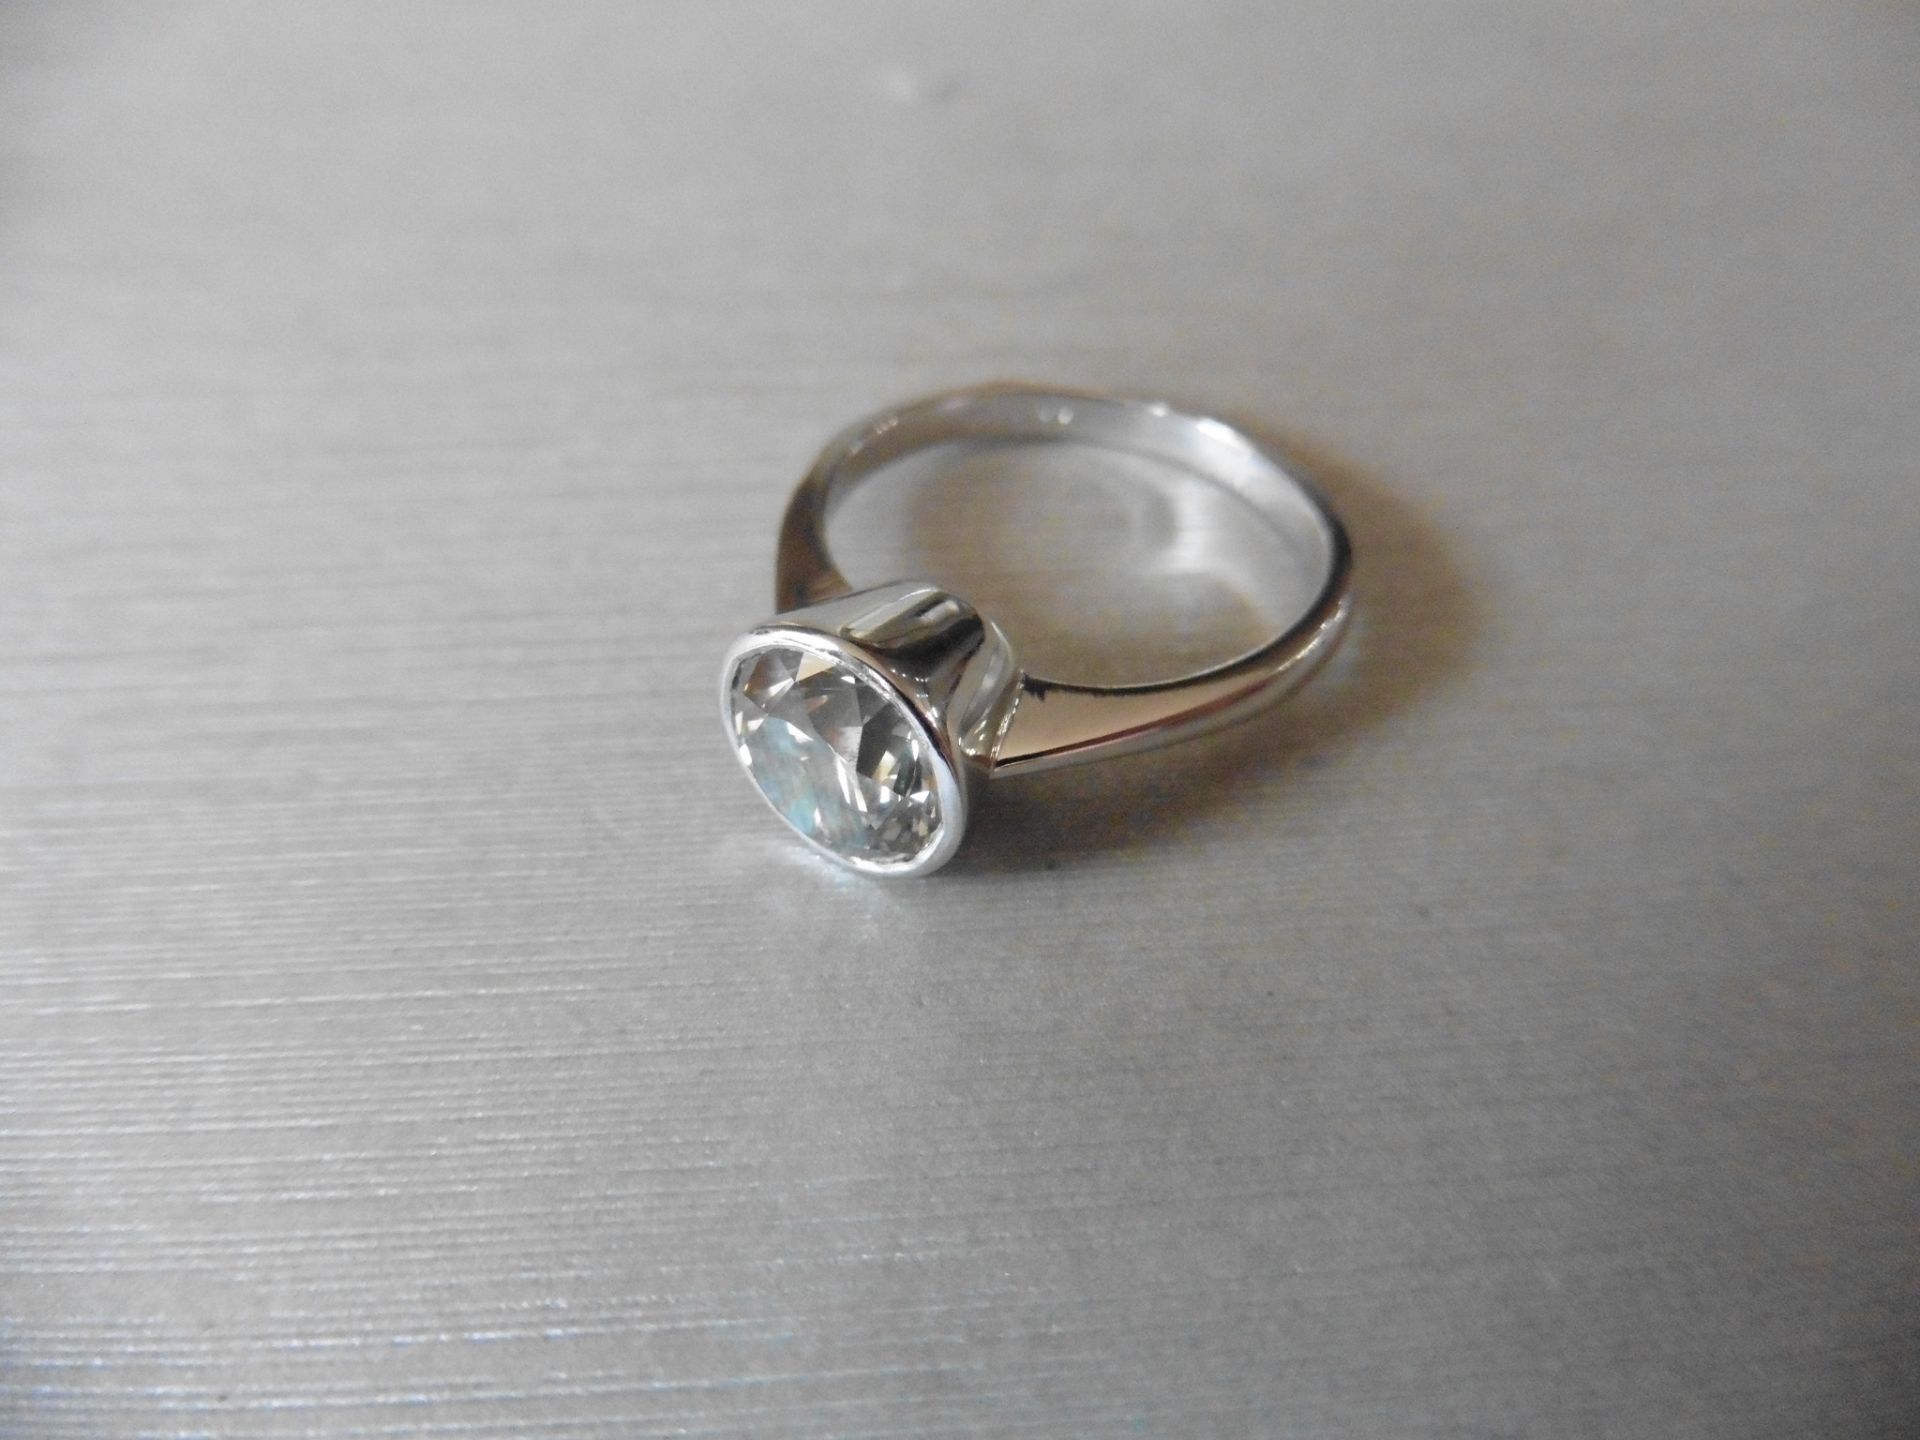 2.00ct diamond solitaire ring. Set in 18ct white gold rub over setting. L colour, Si2 clarity. - Image 4 of 4